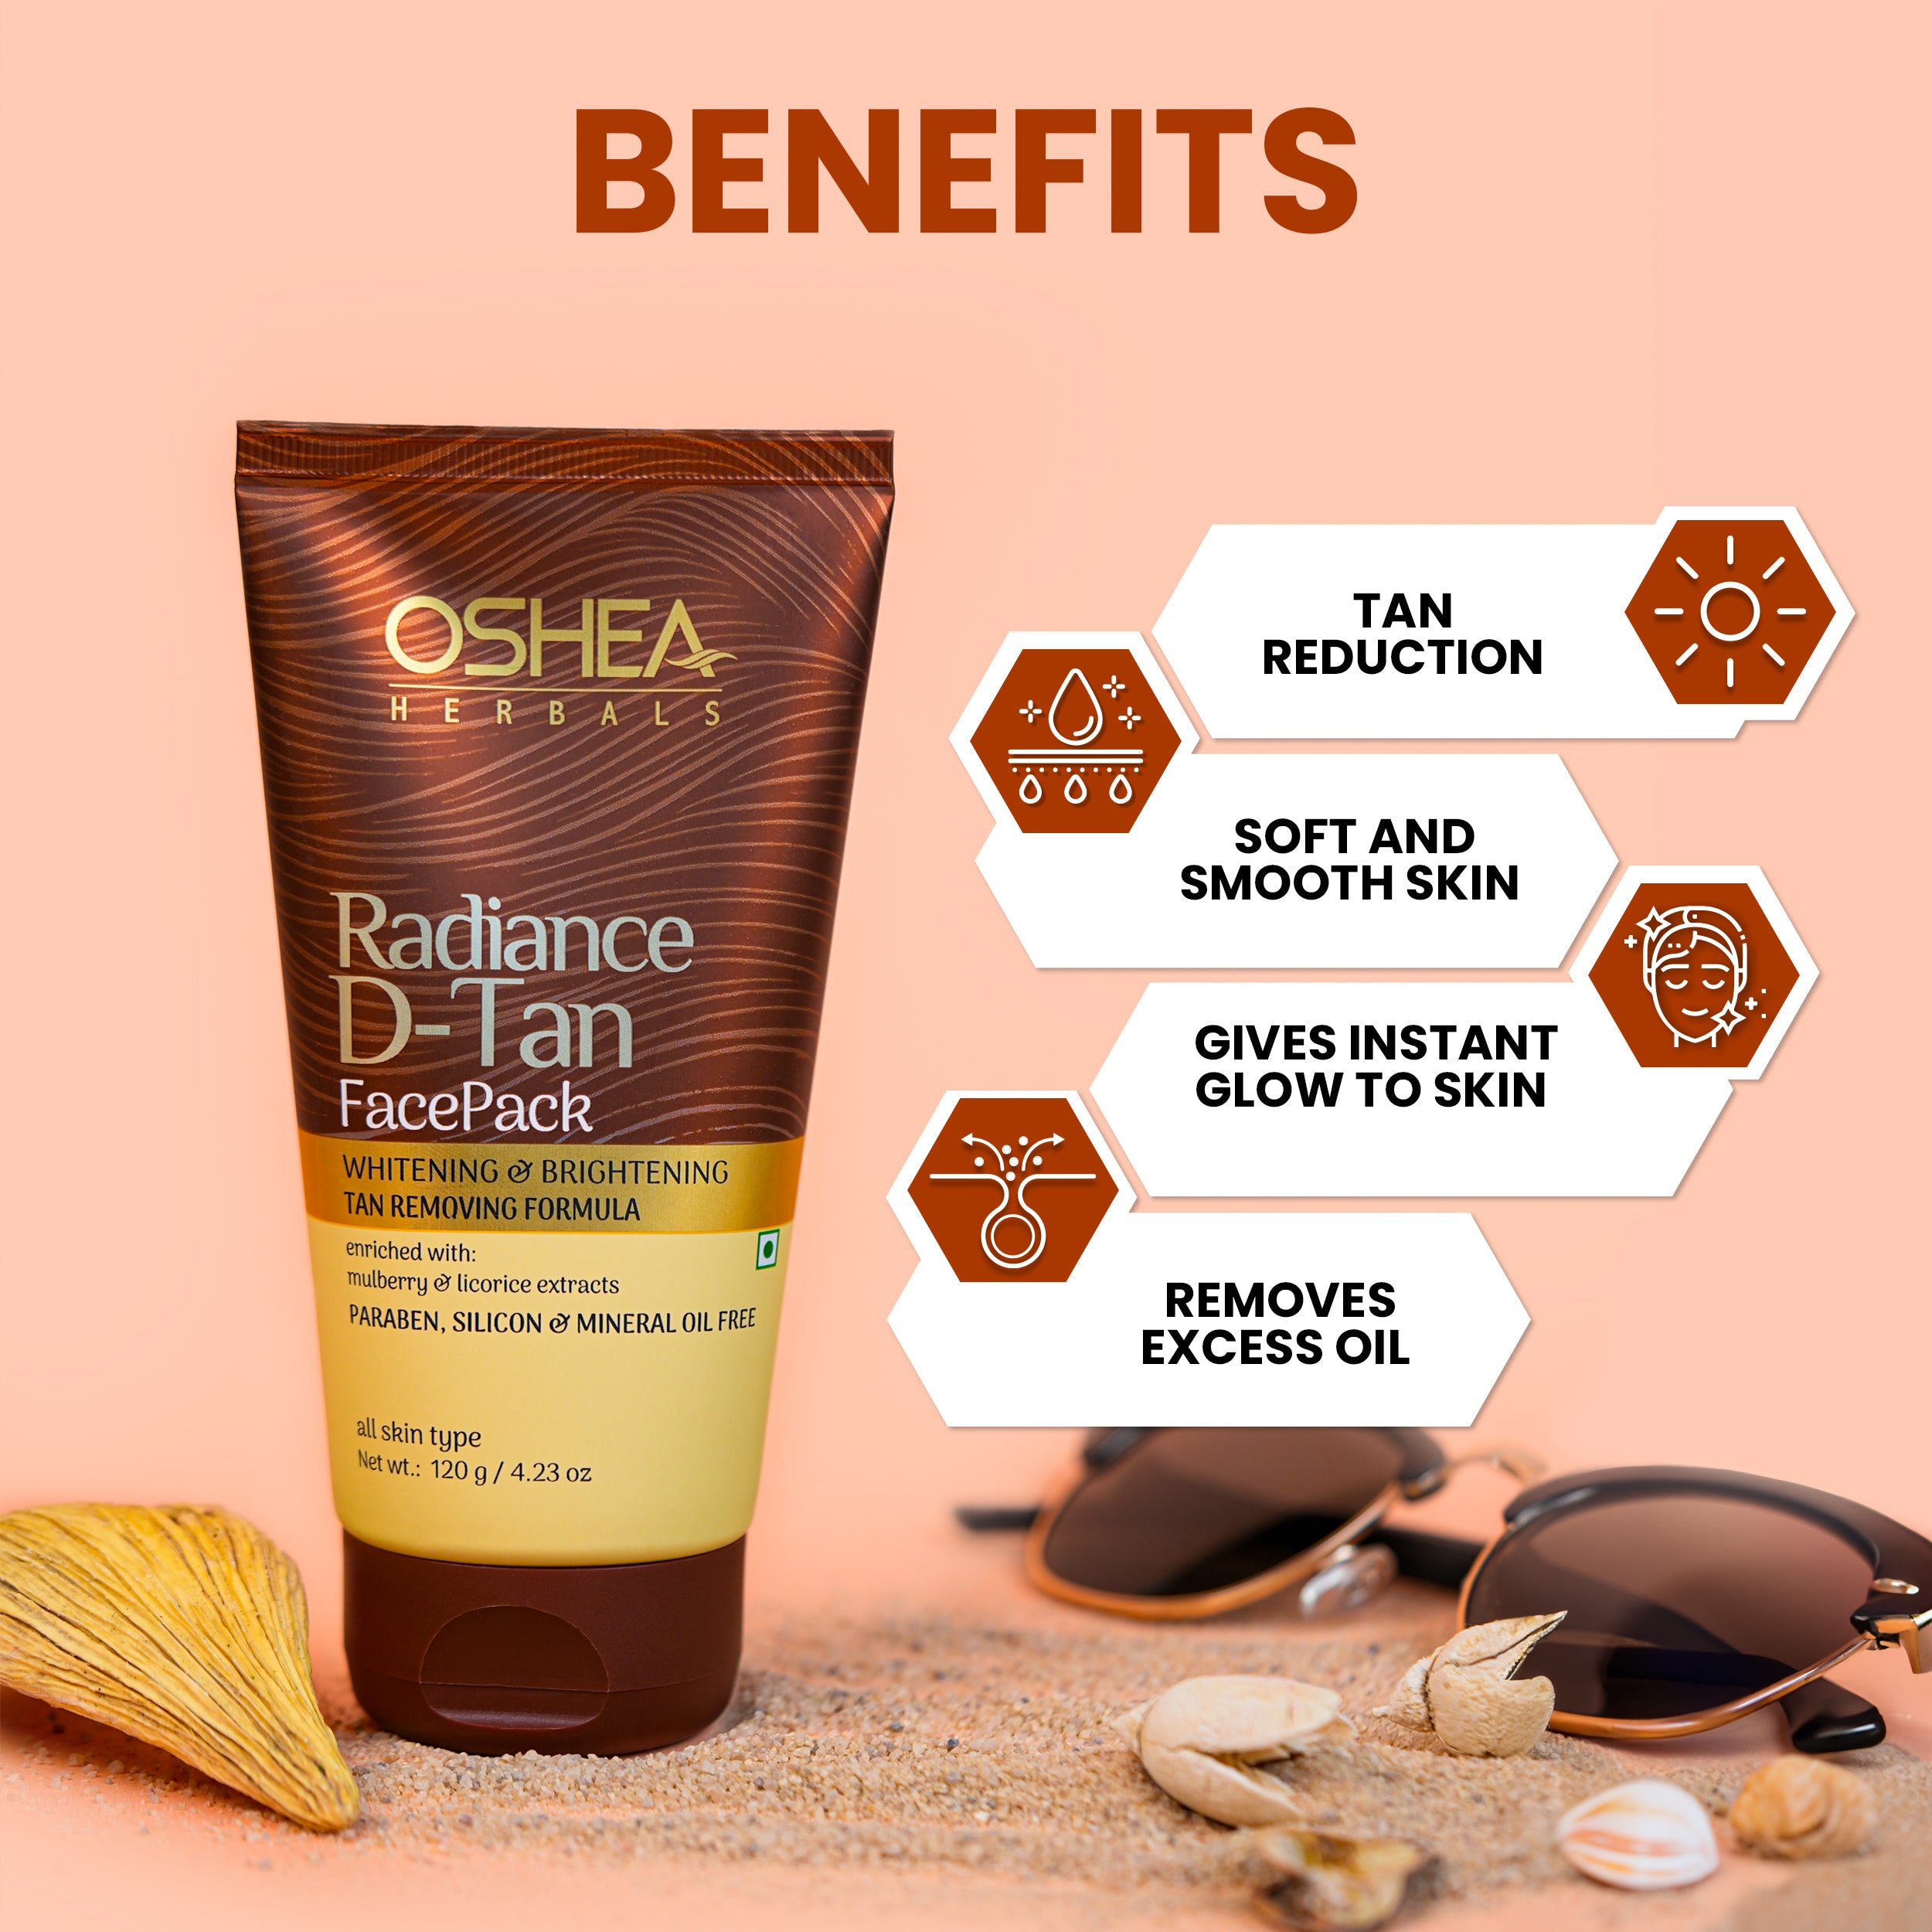 Benefits Radiance D-Tan Face Pack Oshea Herbals